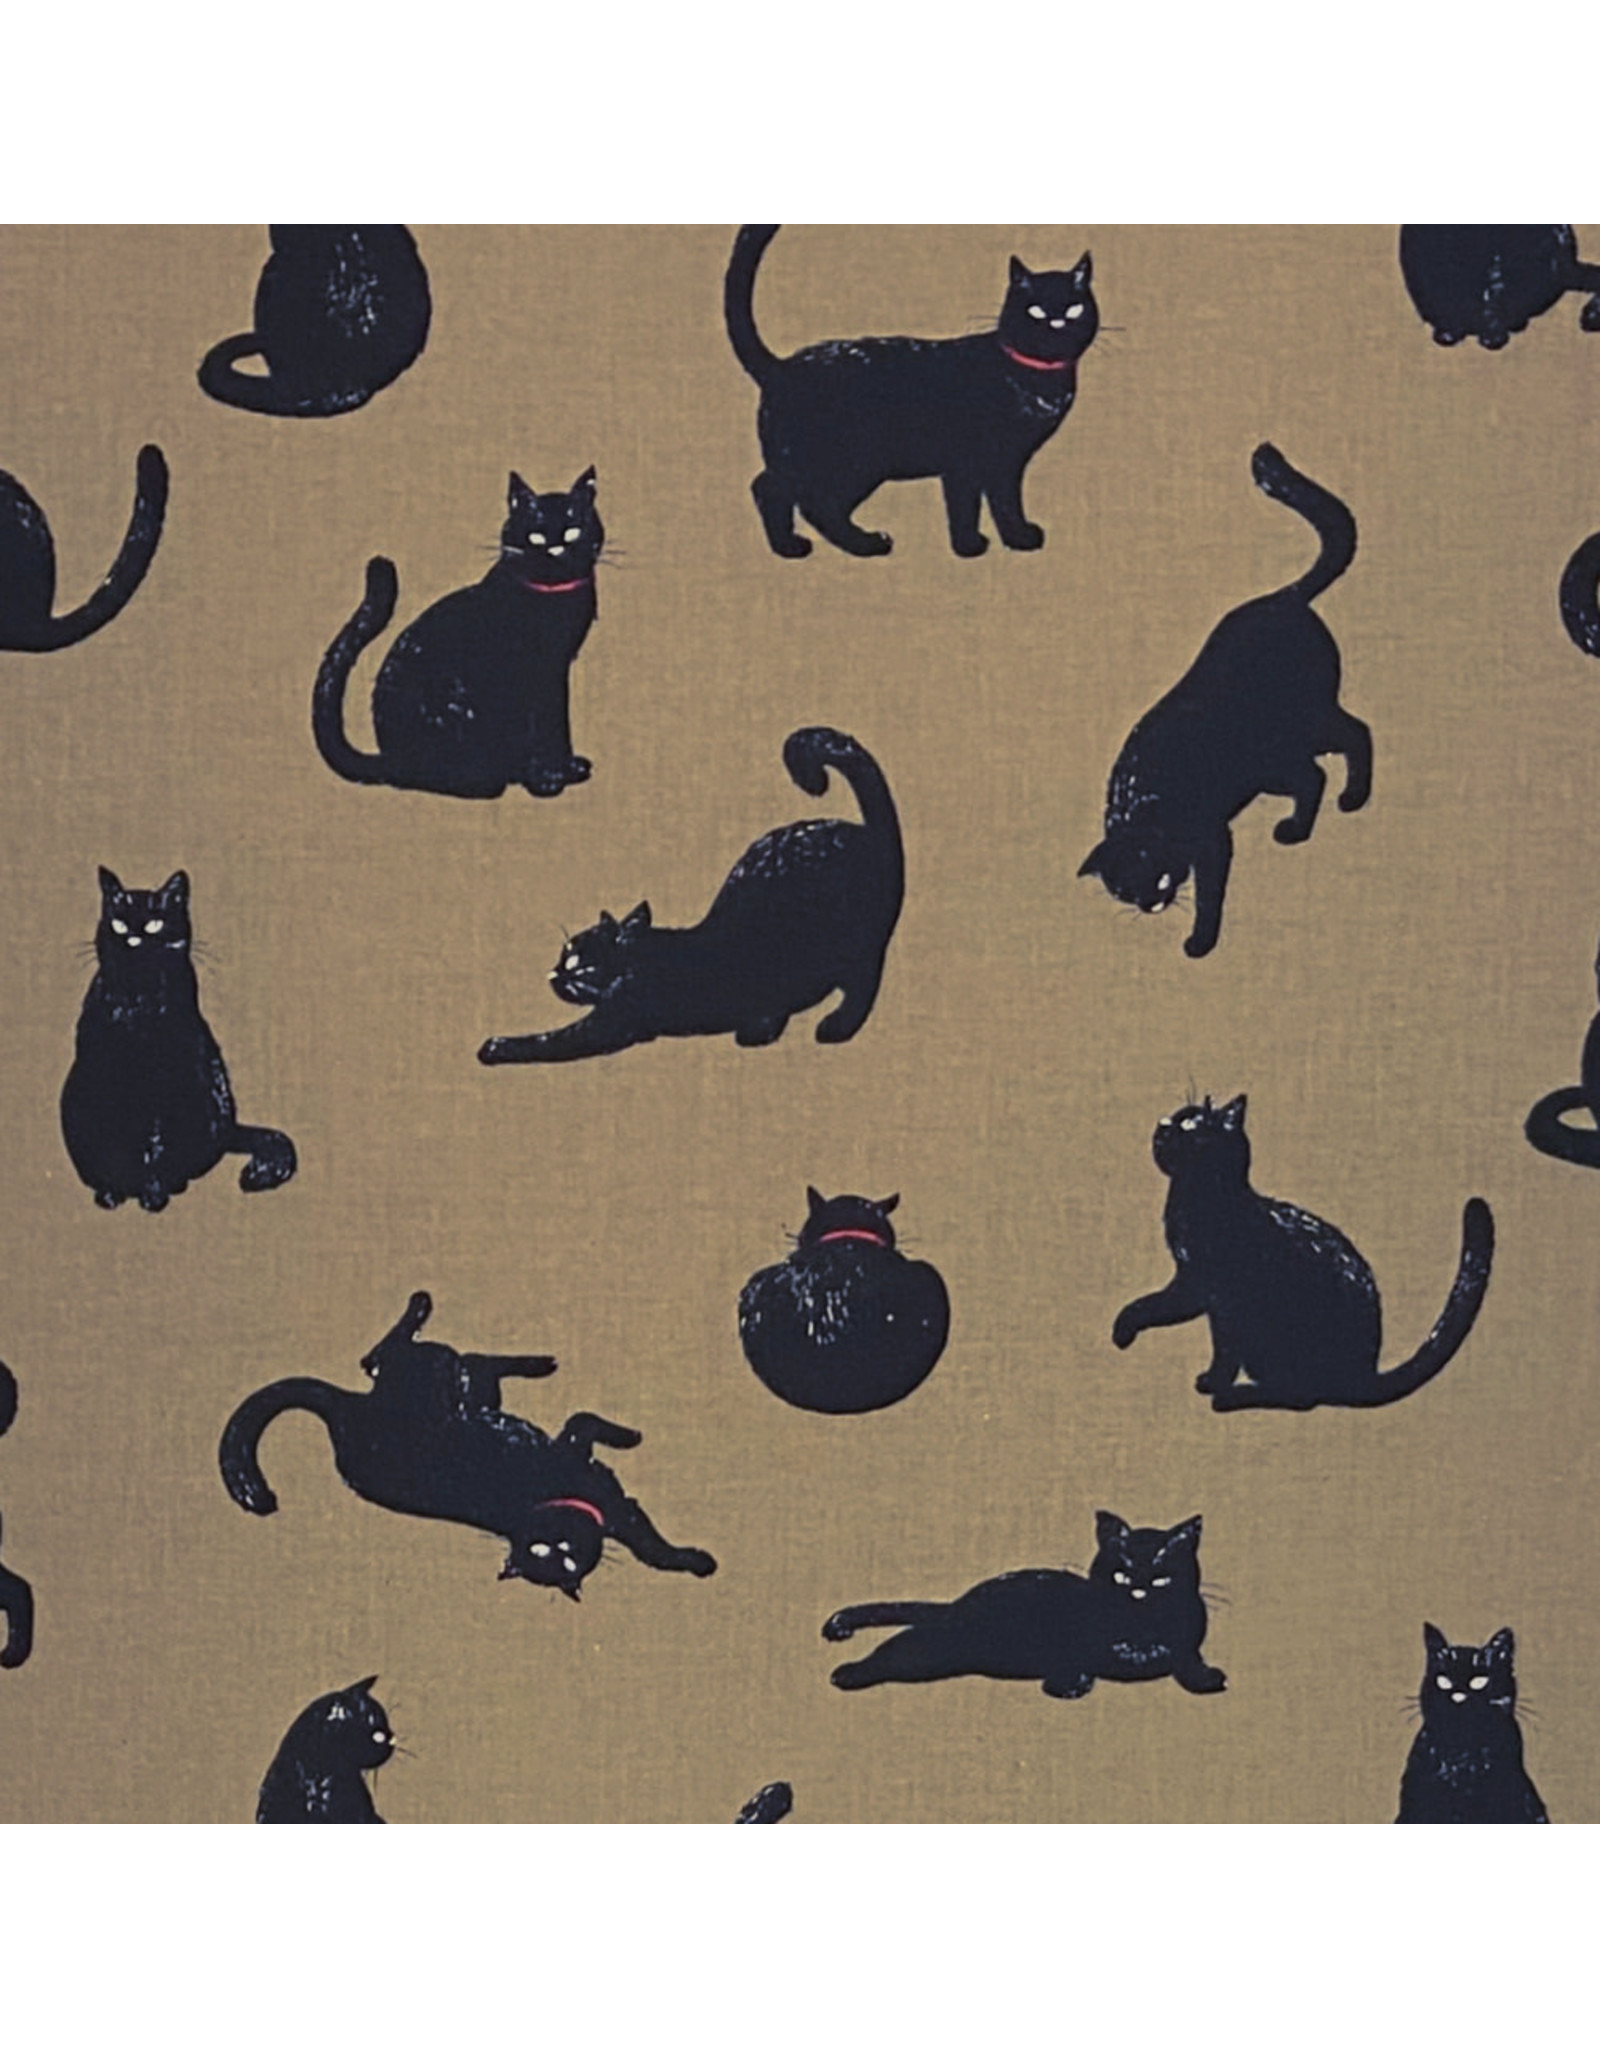 Cosmo, Japan Cosmo Japan, Black Cats on Brown, Fabric Half-Yards